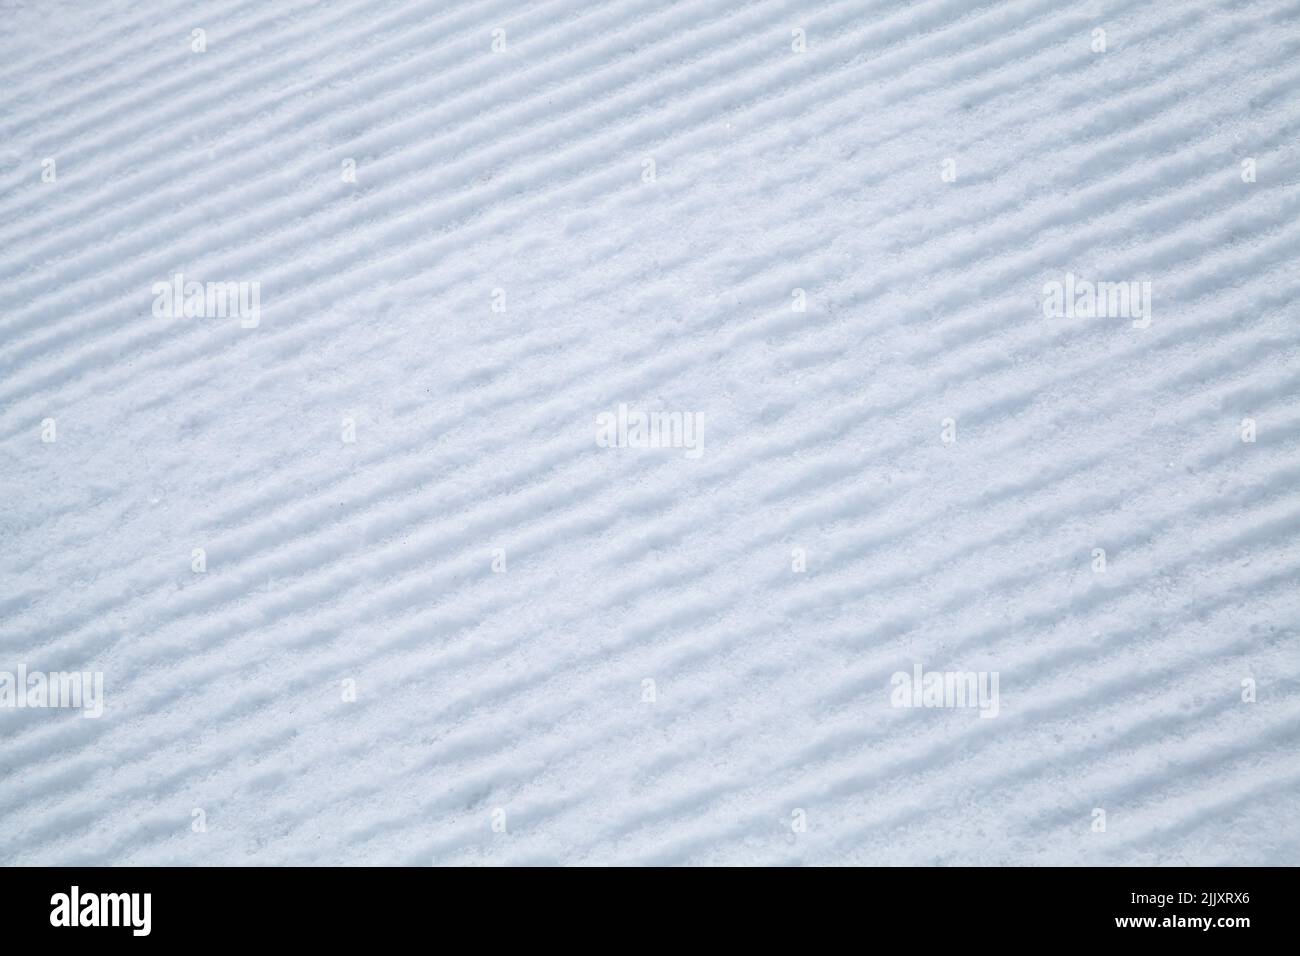 Striped texture of a snow on the ski slope Stock Photo